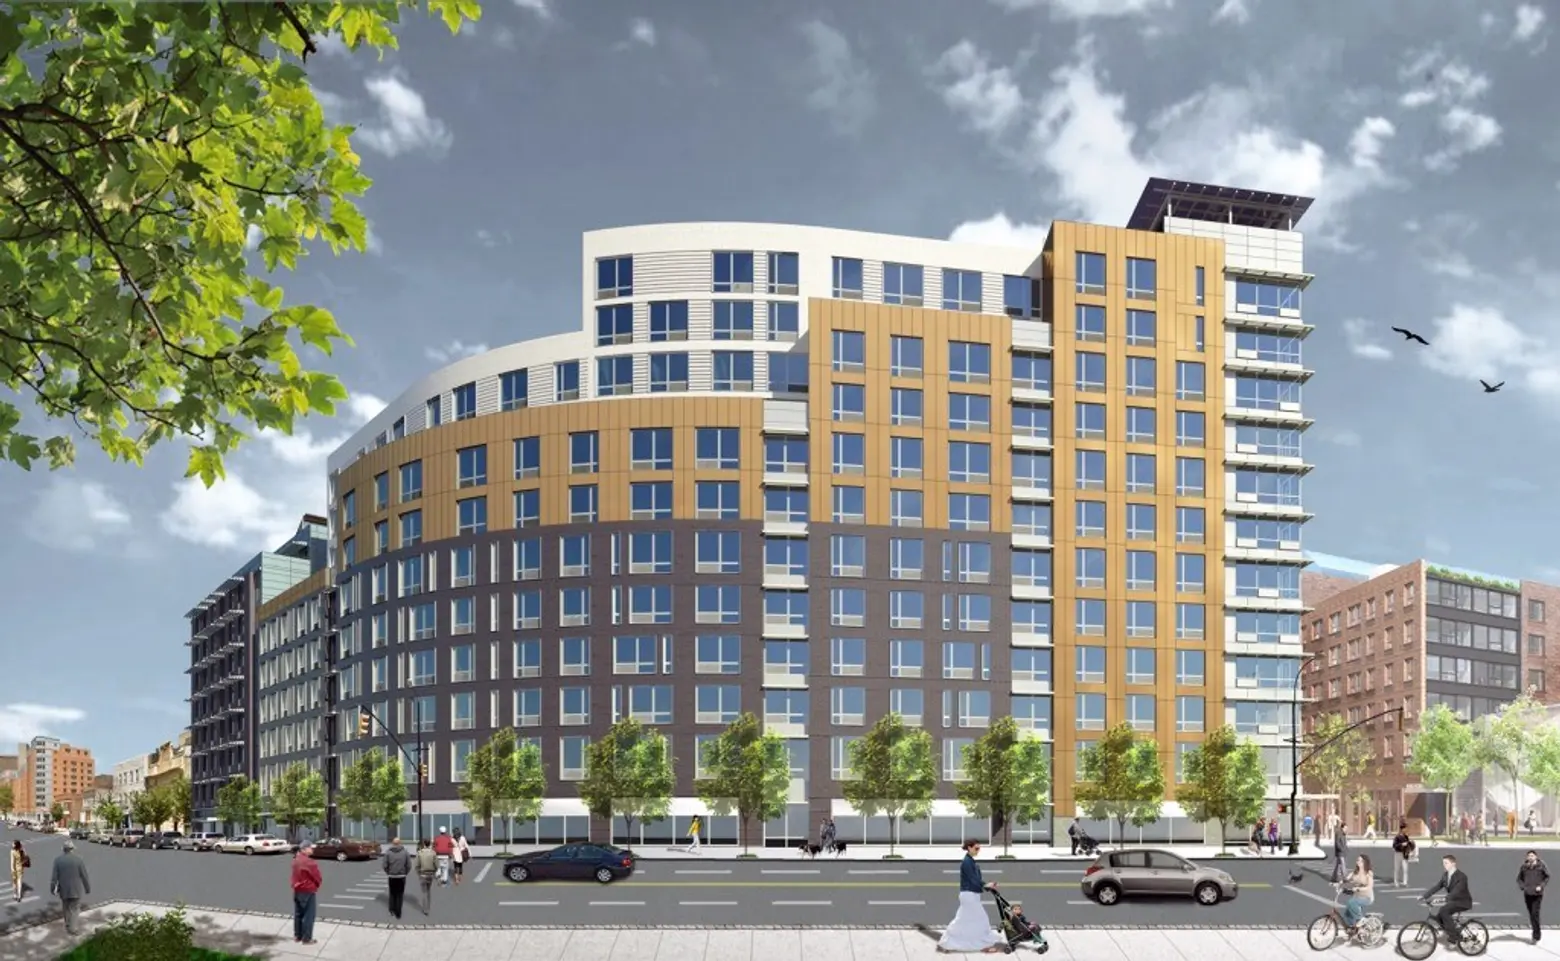 Live in a brand new building near Yankees Stadium, from $396/month